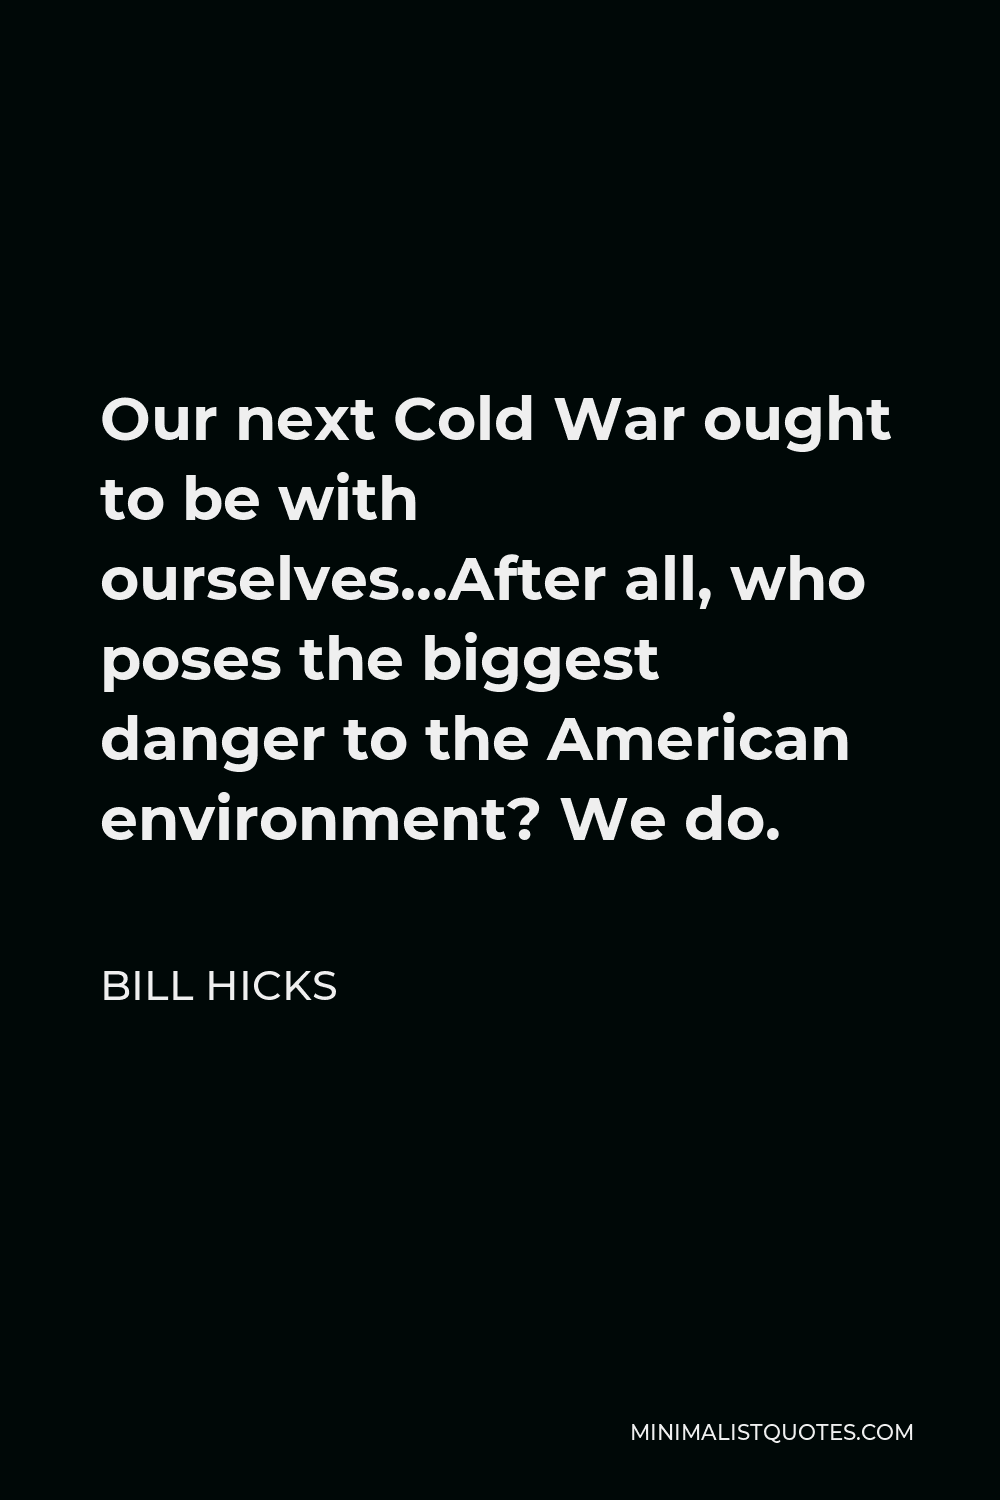 Bill Hicks Quote - Our next Cold War ought to be with ourselves…After all, who poses the biggest danger to the American environment? We do.